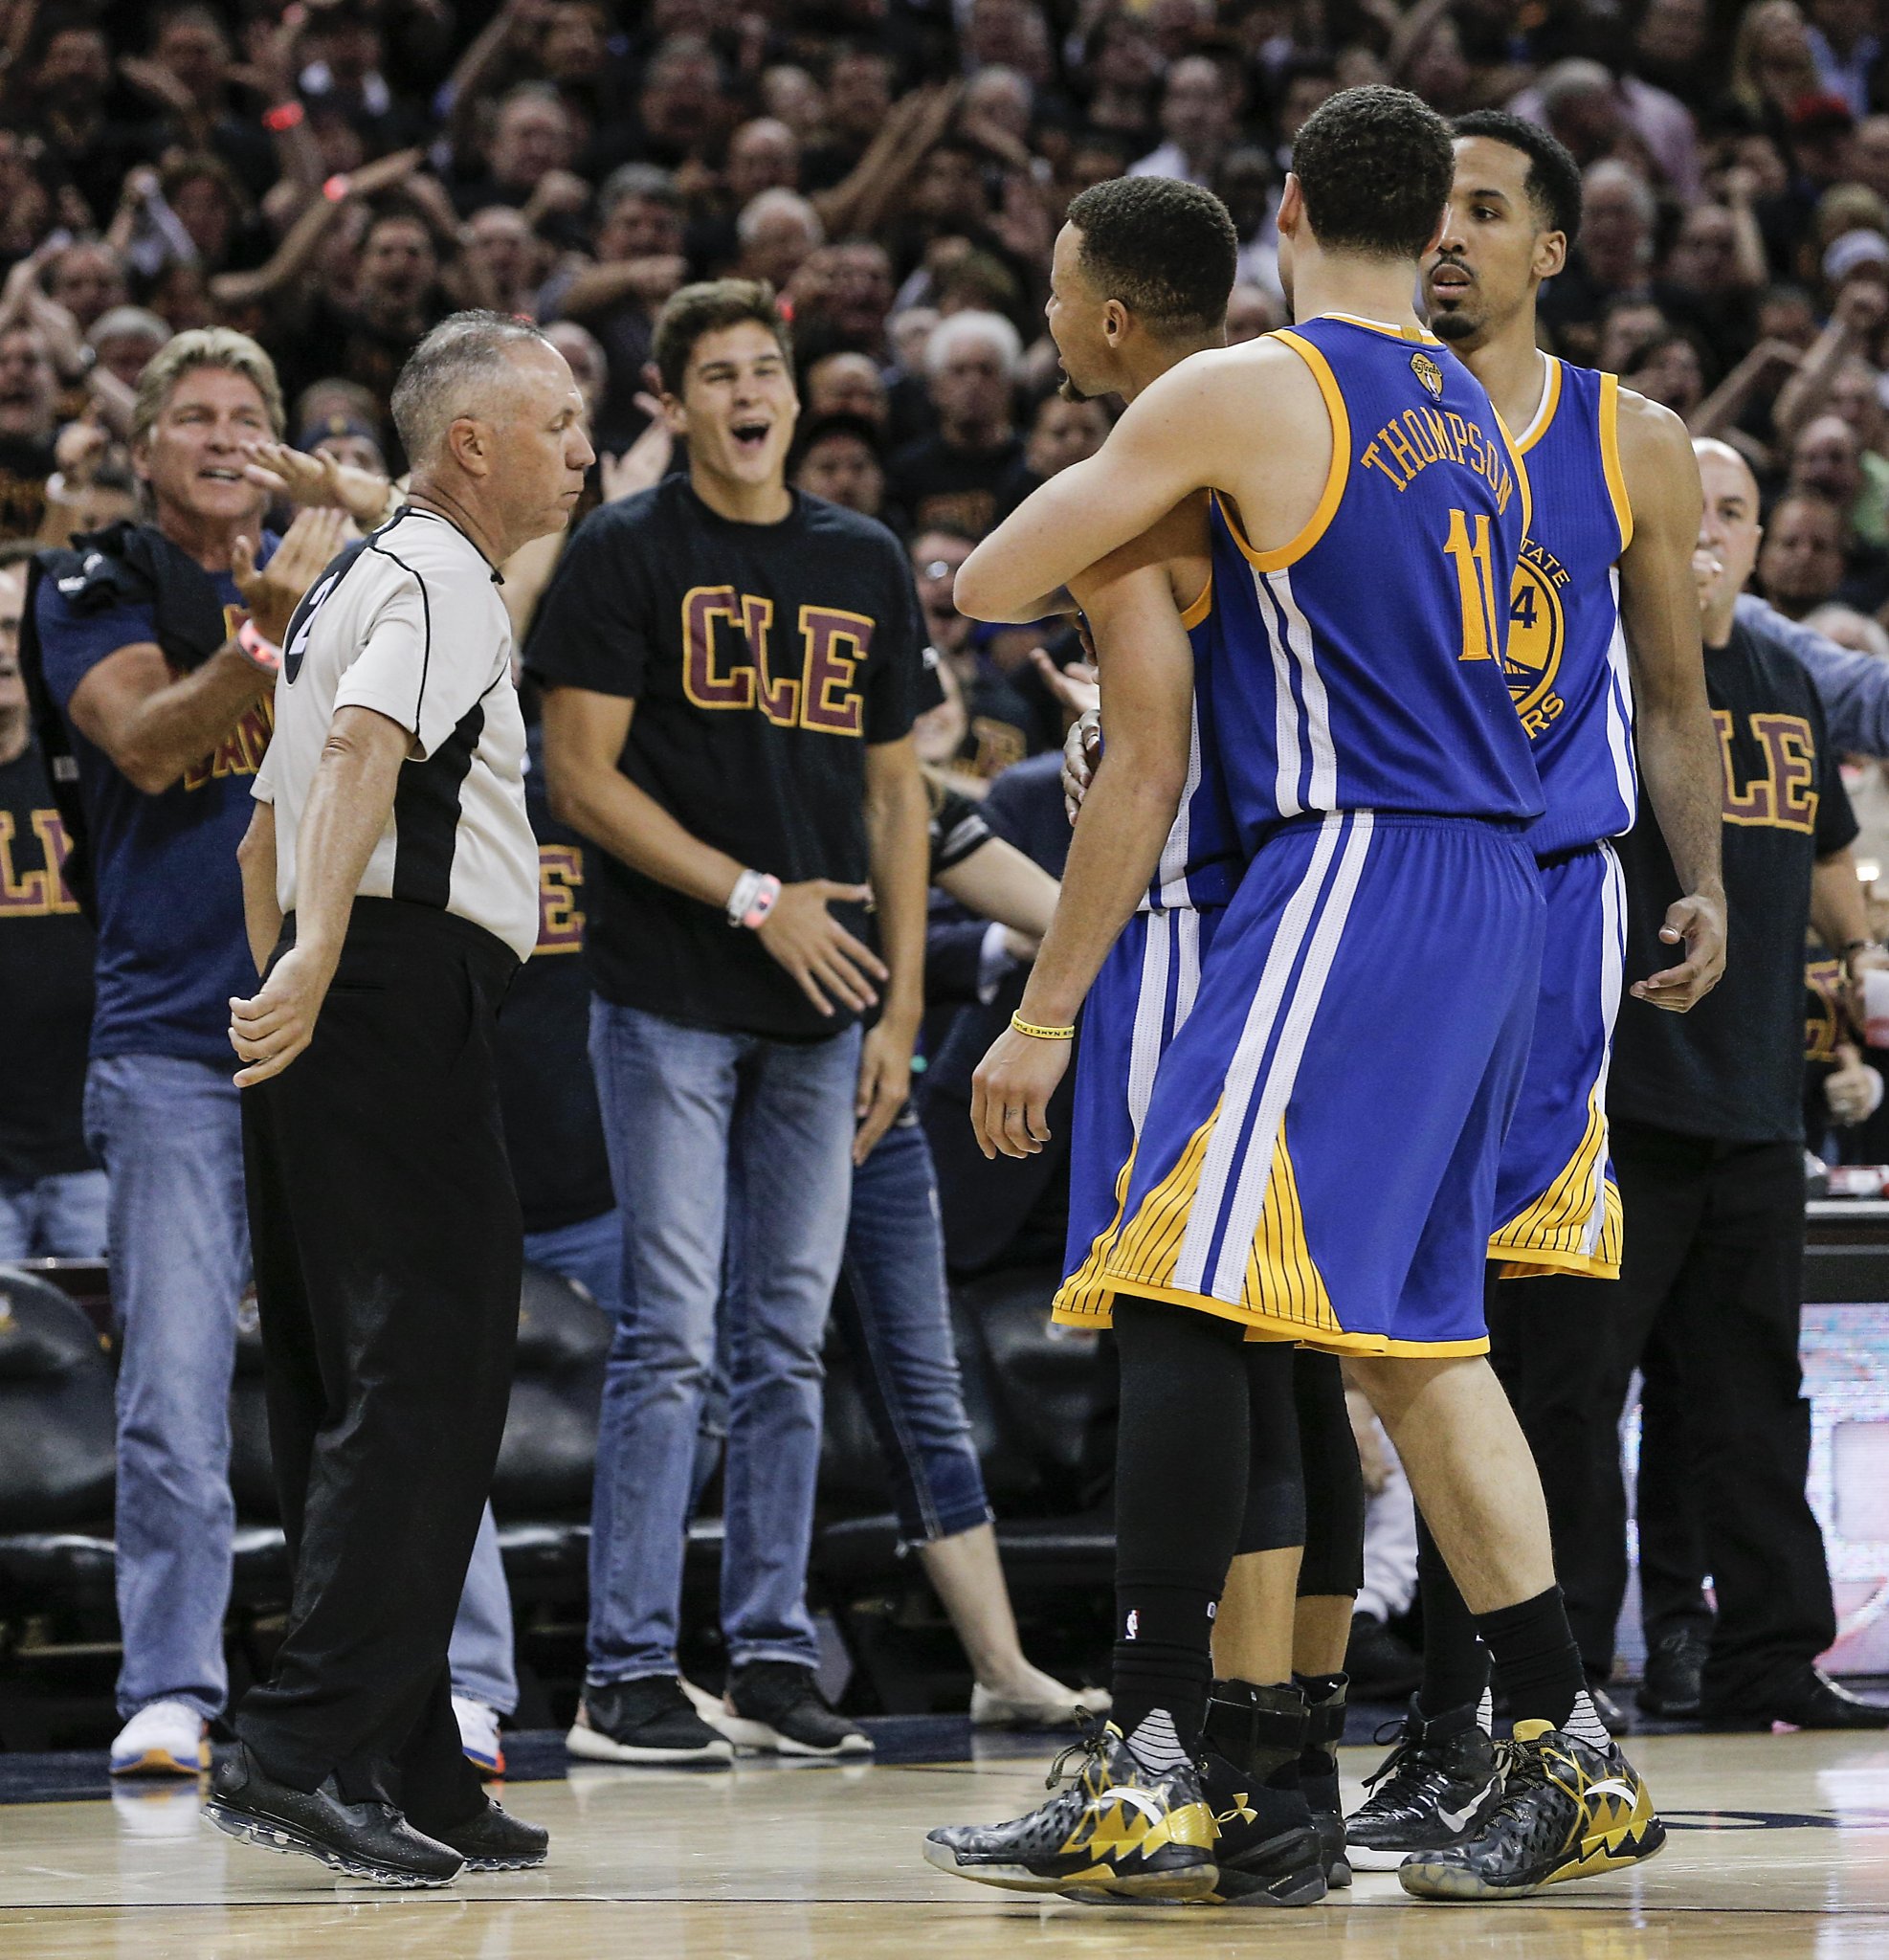 NBA Finals 2016: Stephen Curry and Klay Thompson were miserable